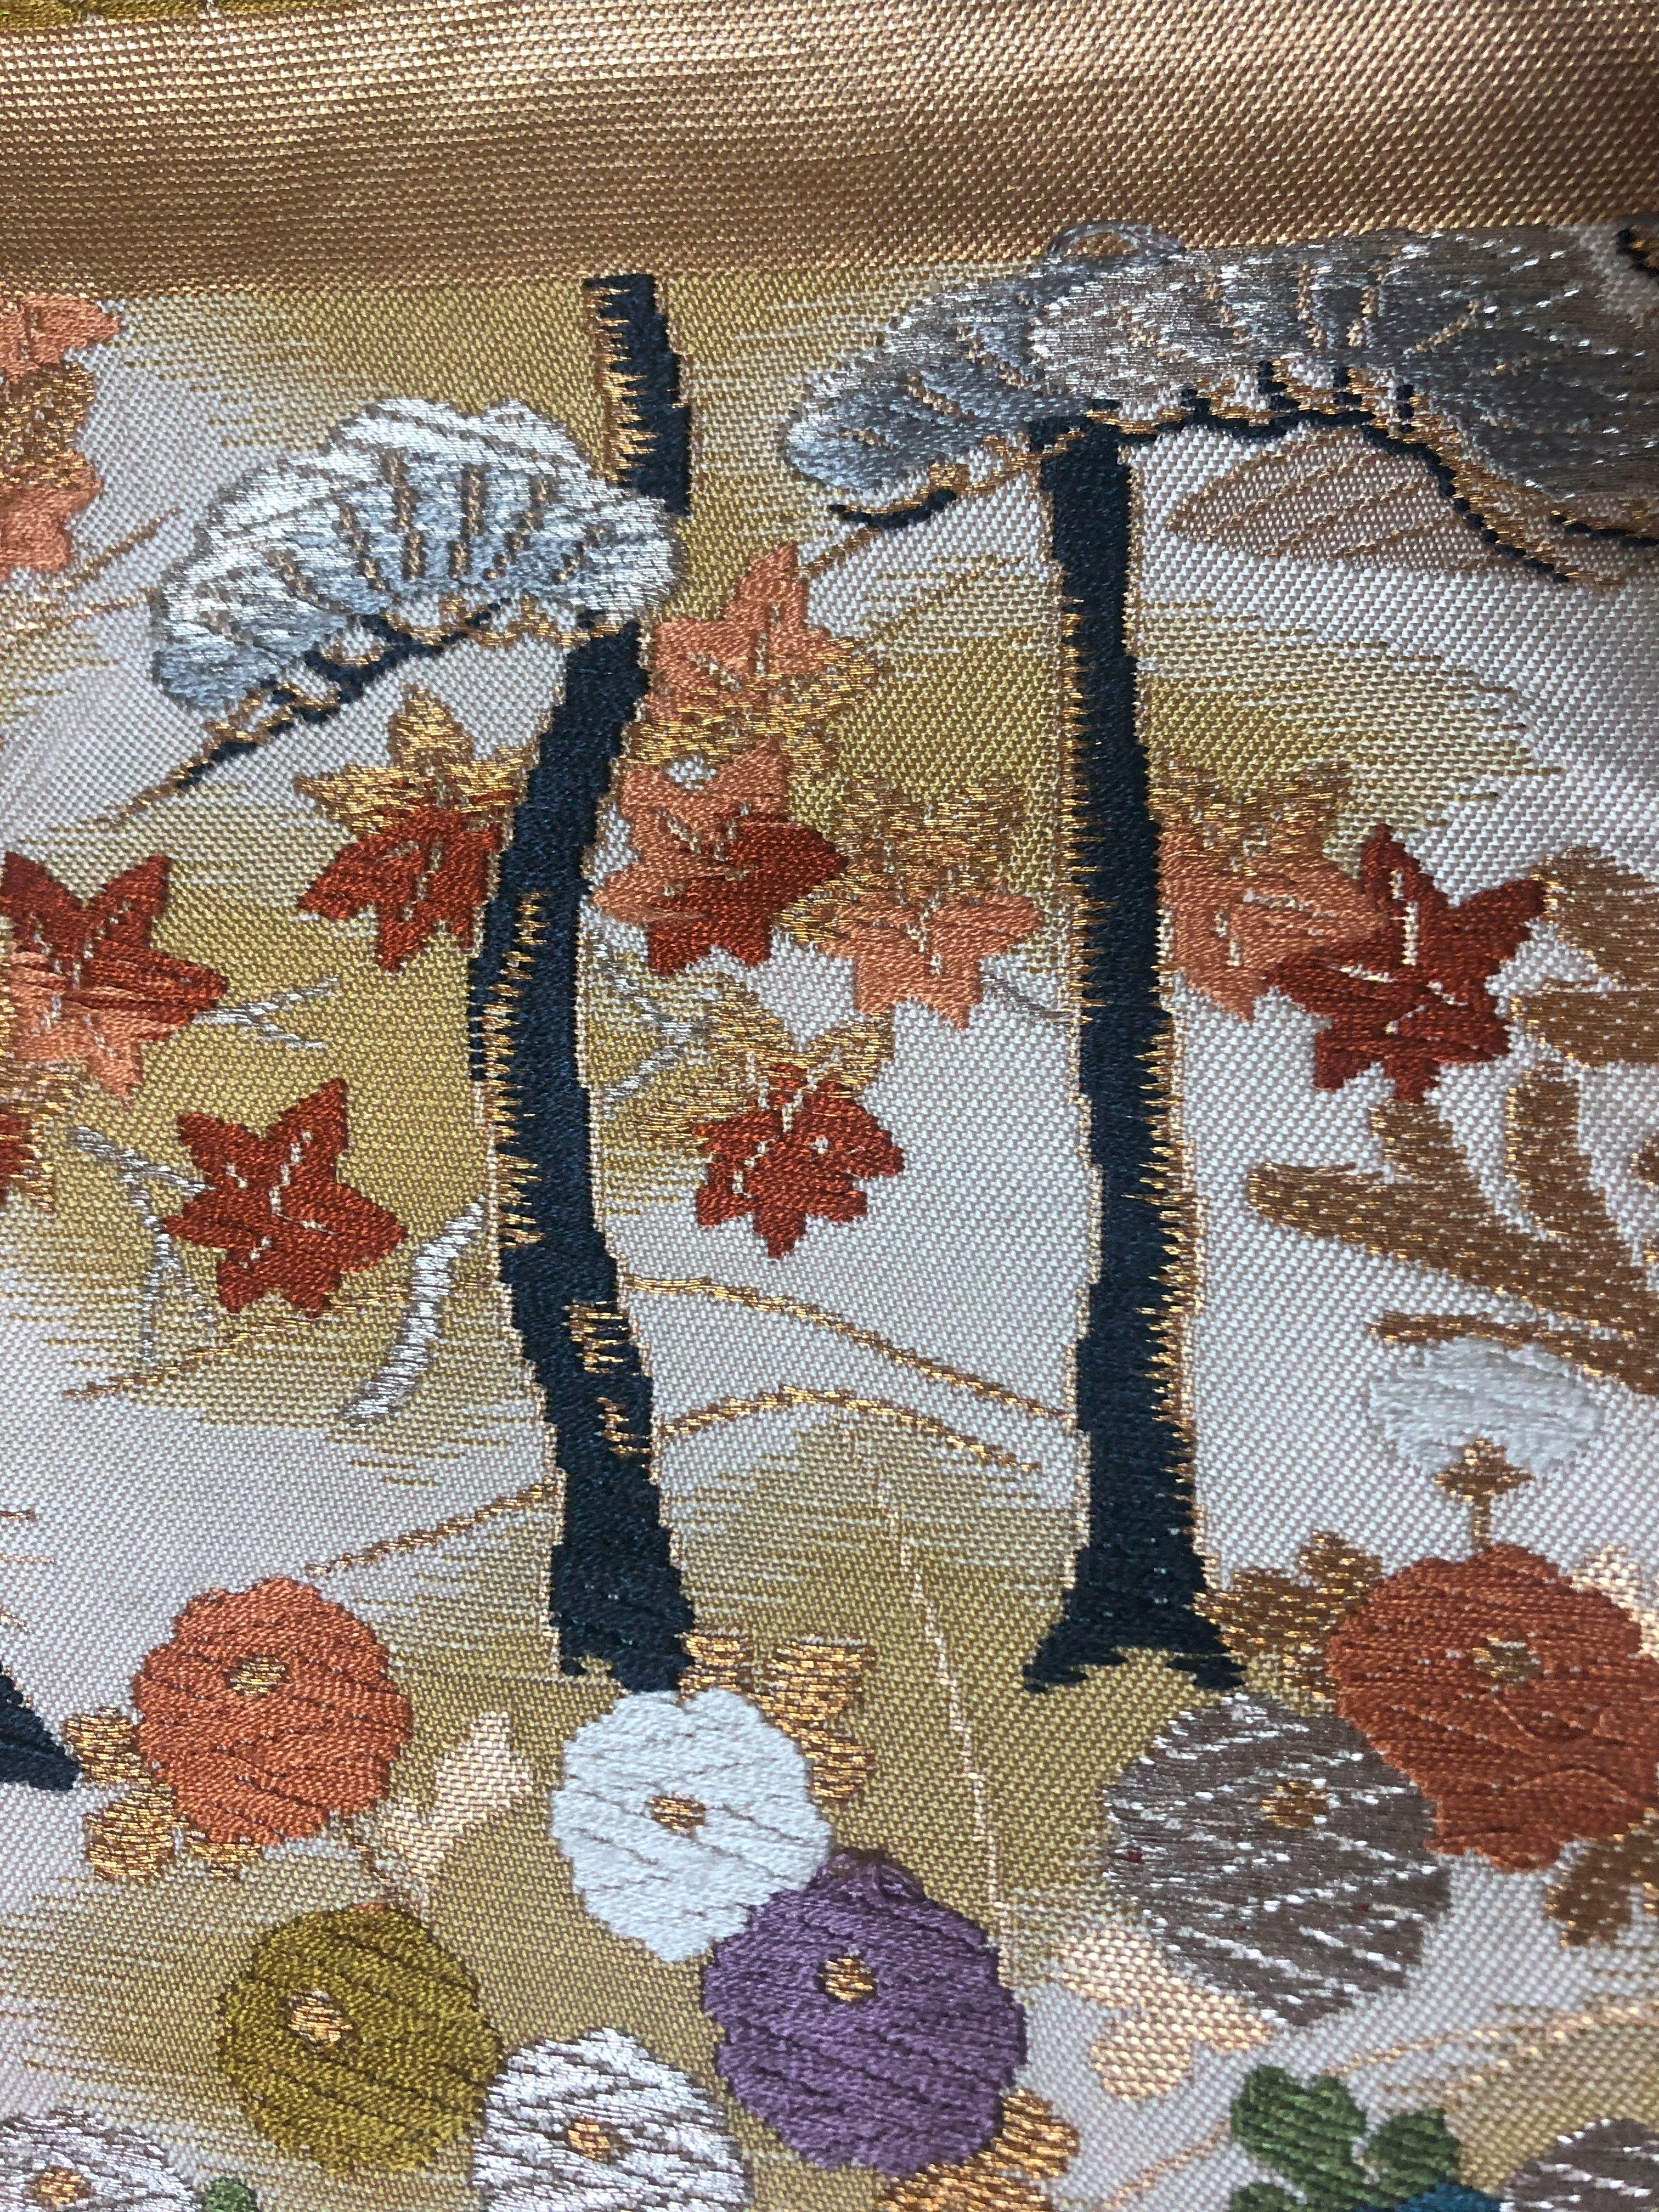 Hand-Crafted Kimono Art / Japanese Wall Art / “Garden by the Sea” For Sale